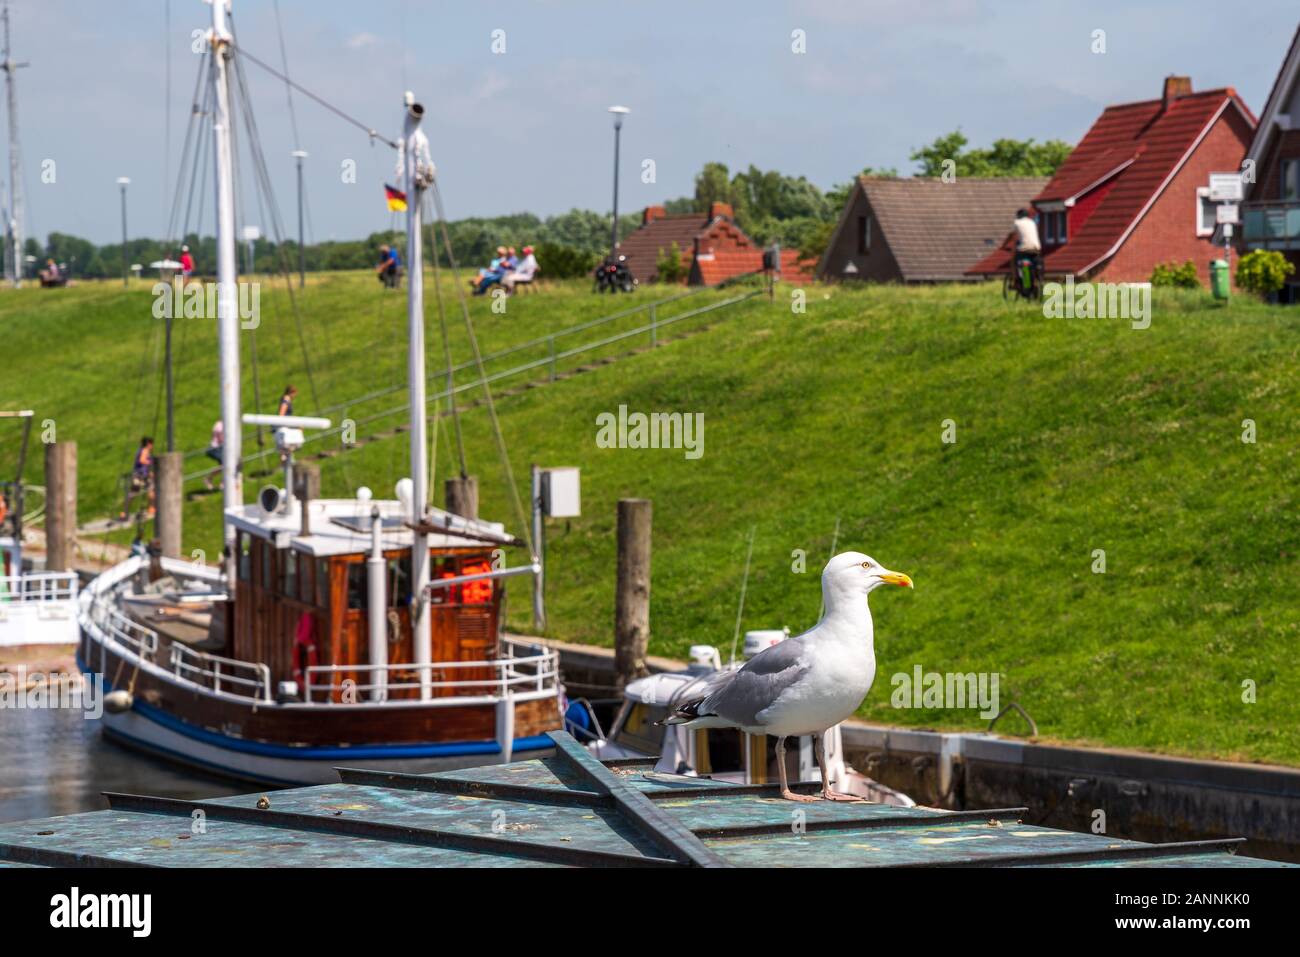 A seagull in the foreground, fishing boat and unrecognizable persons in the background Stock Photo